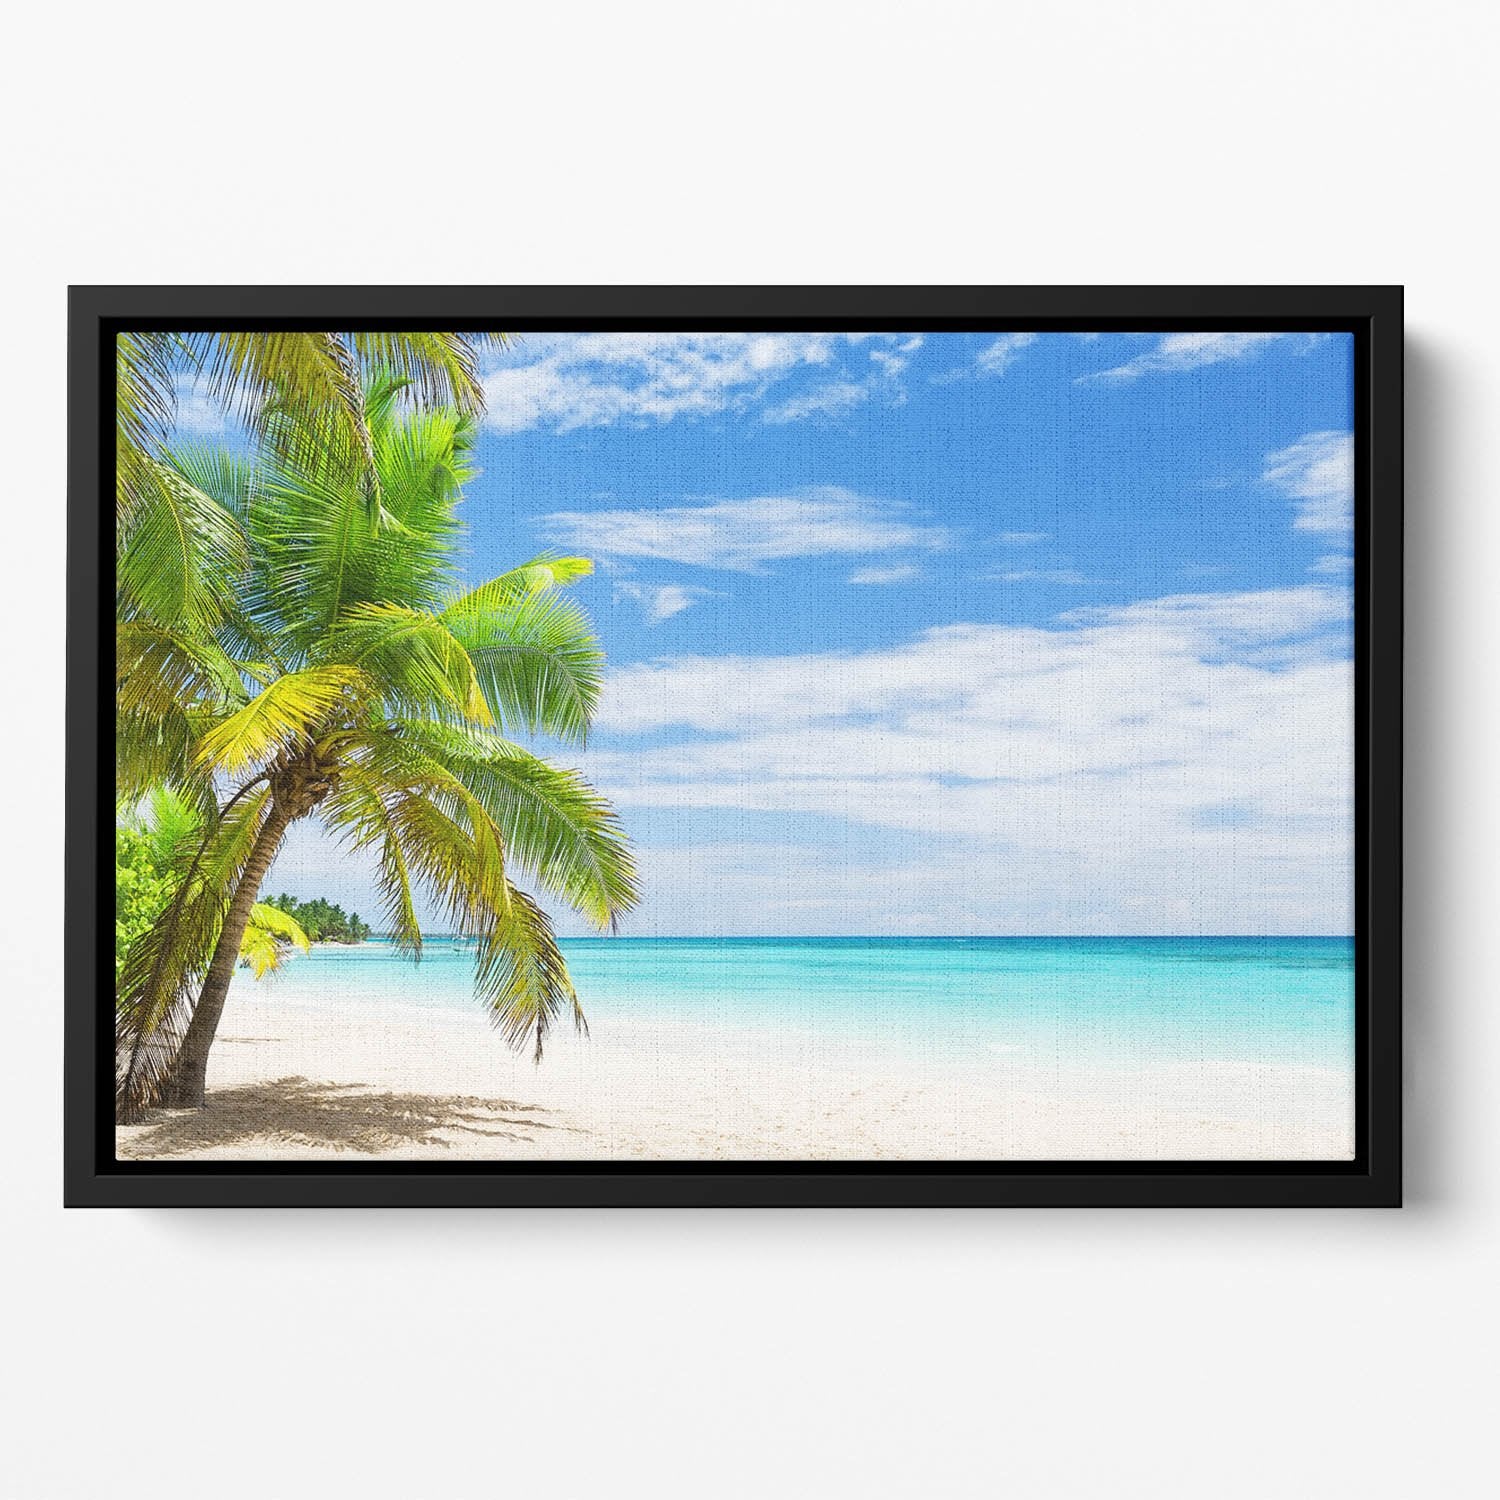 Coconut Palm trees on white sandy beach Floating Framed Canvas